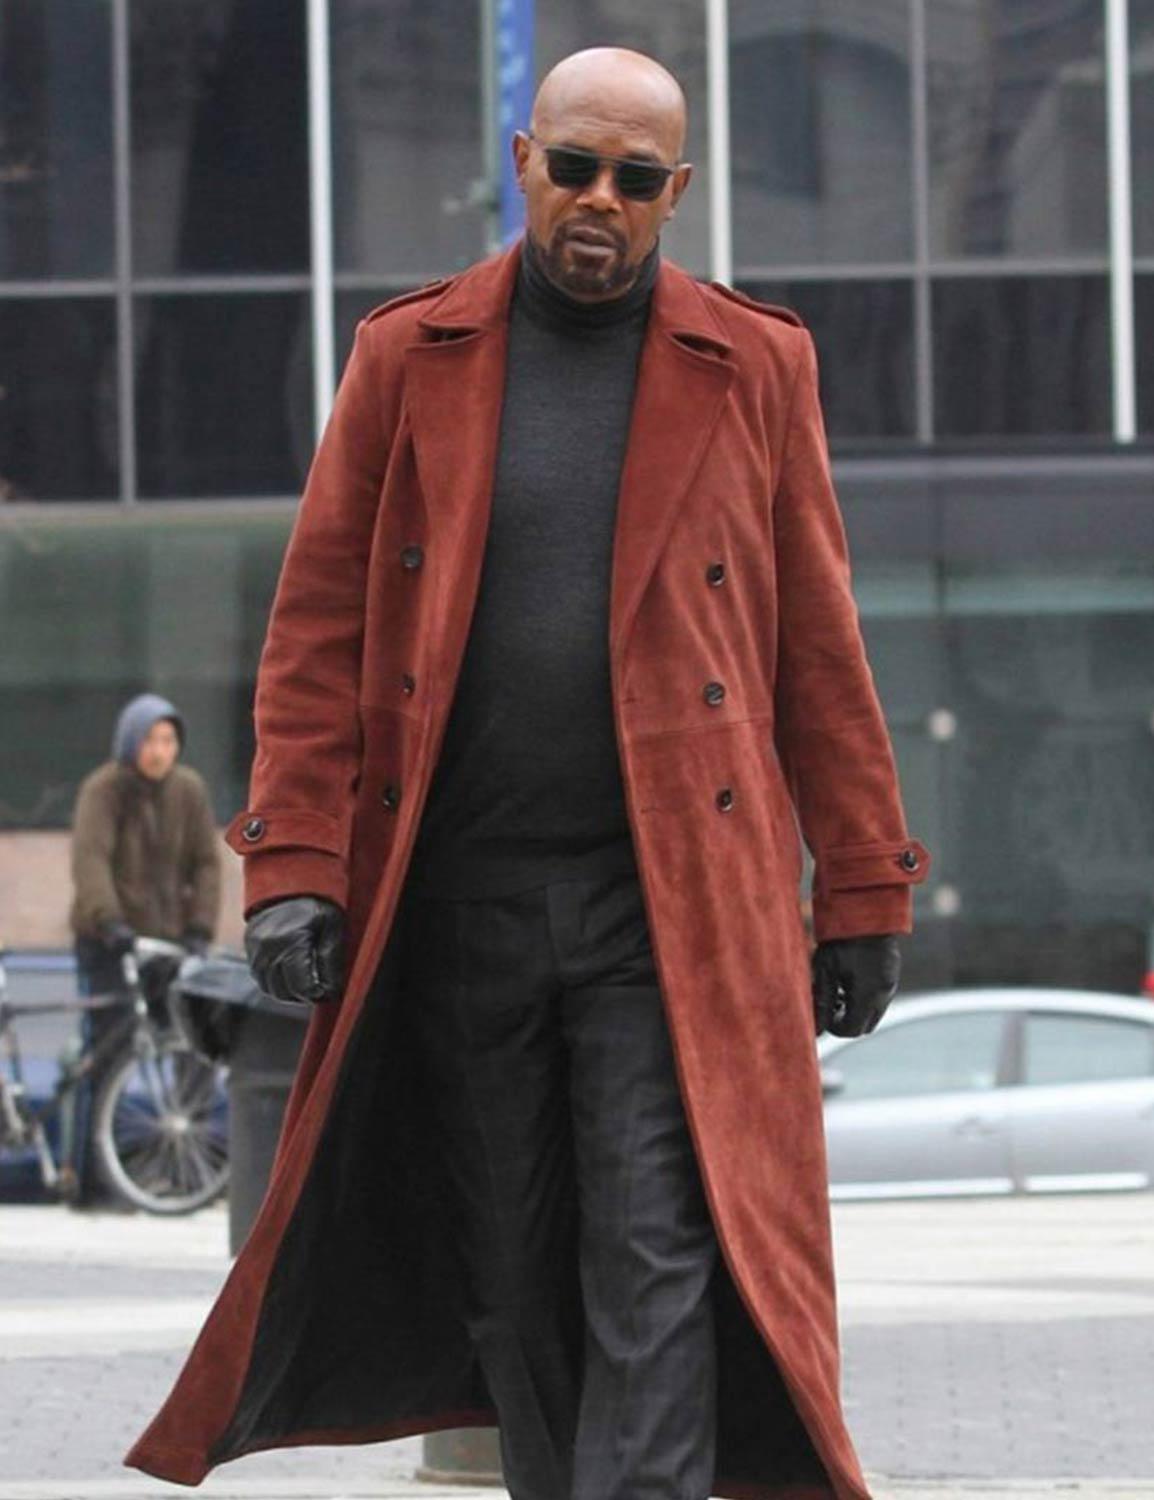 My signature style: The Famous Red Trench Coat